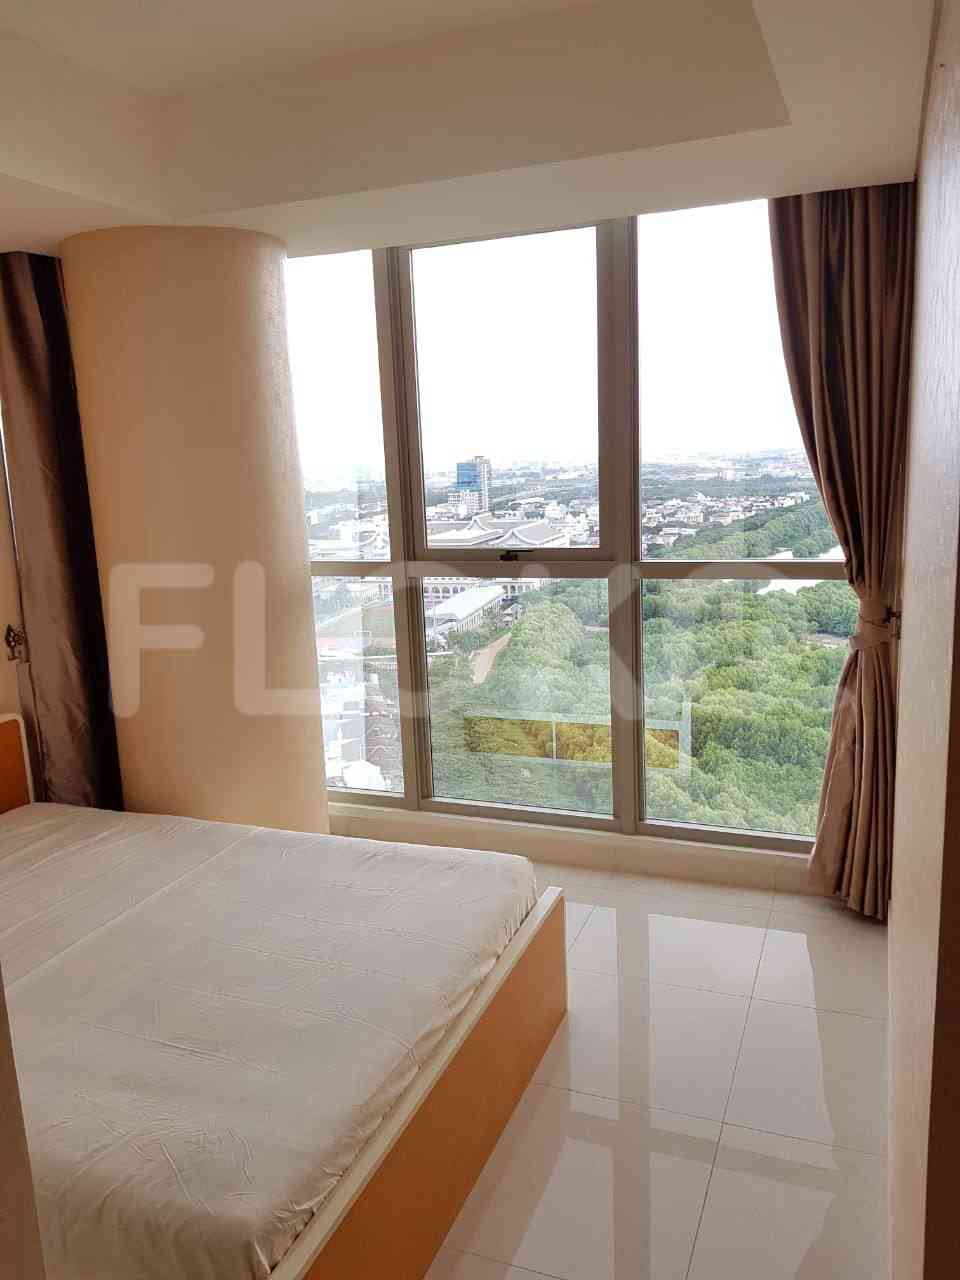 2 Bedroom on 15th Floor for Rent in Gold Coast Apartment - fka661 6